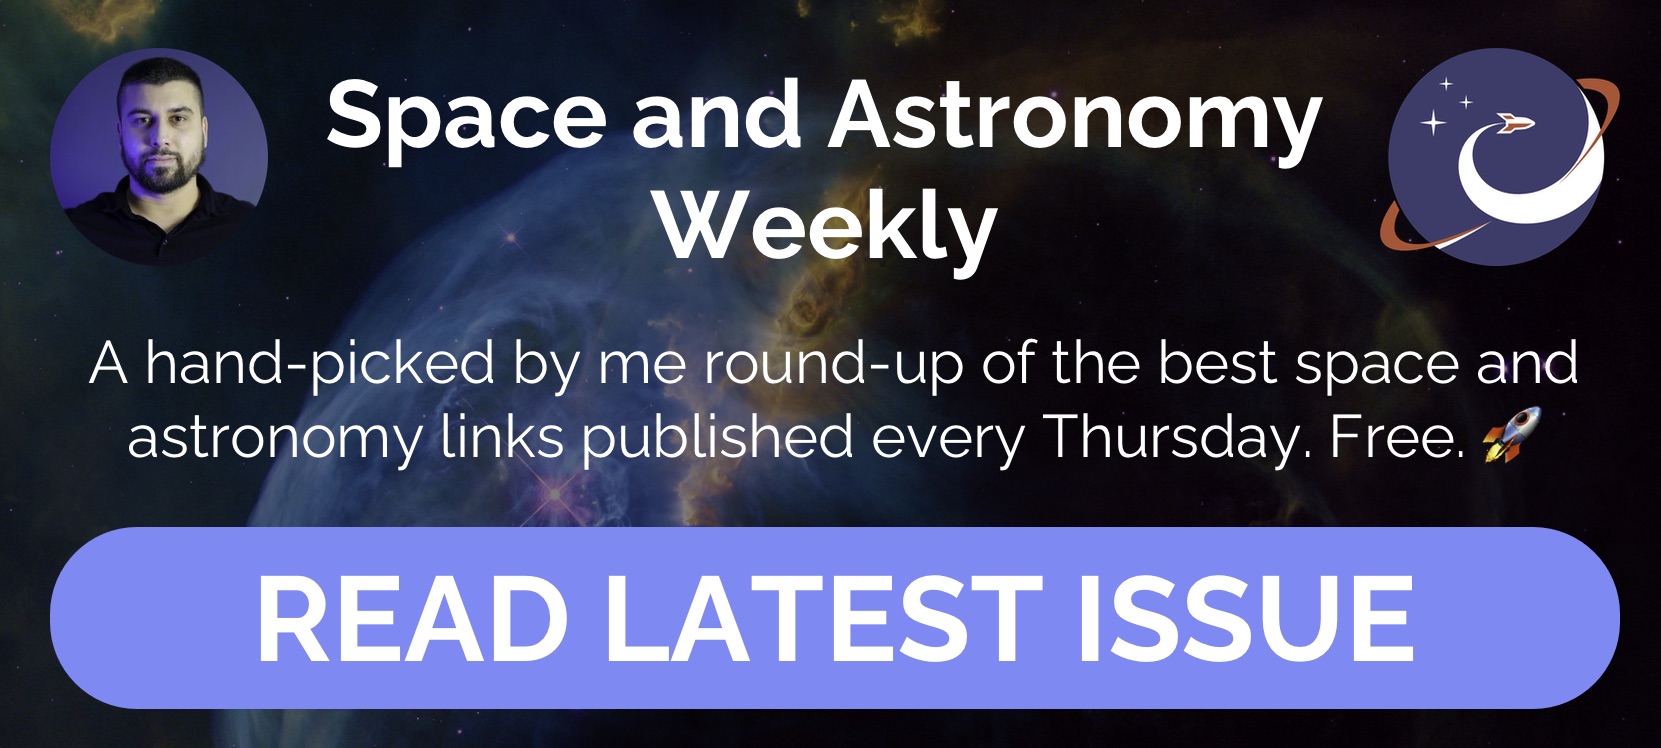 Space and Astronomy Weekly by Paweł Białecki from Astro Photons